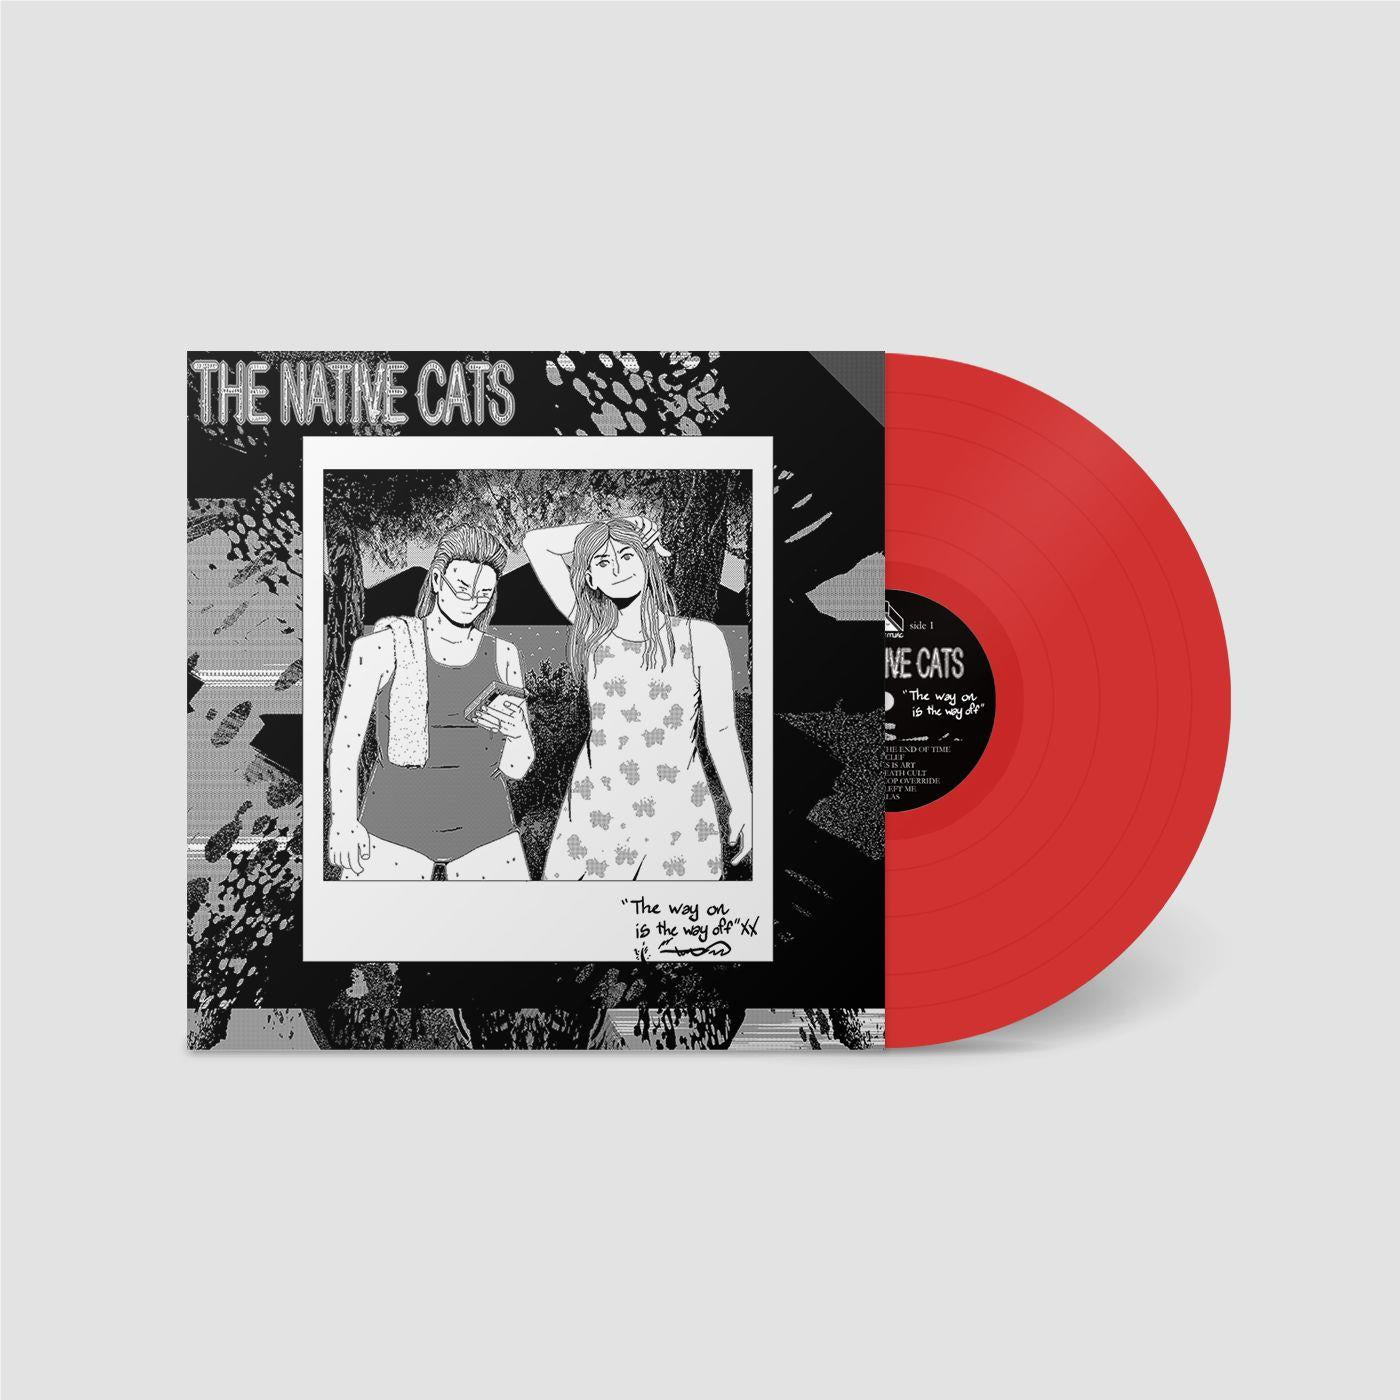 way on is the way off, the (red vinyl)